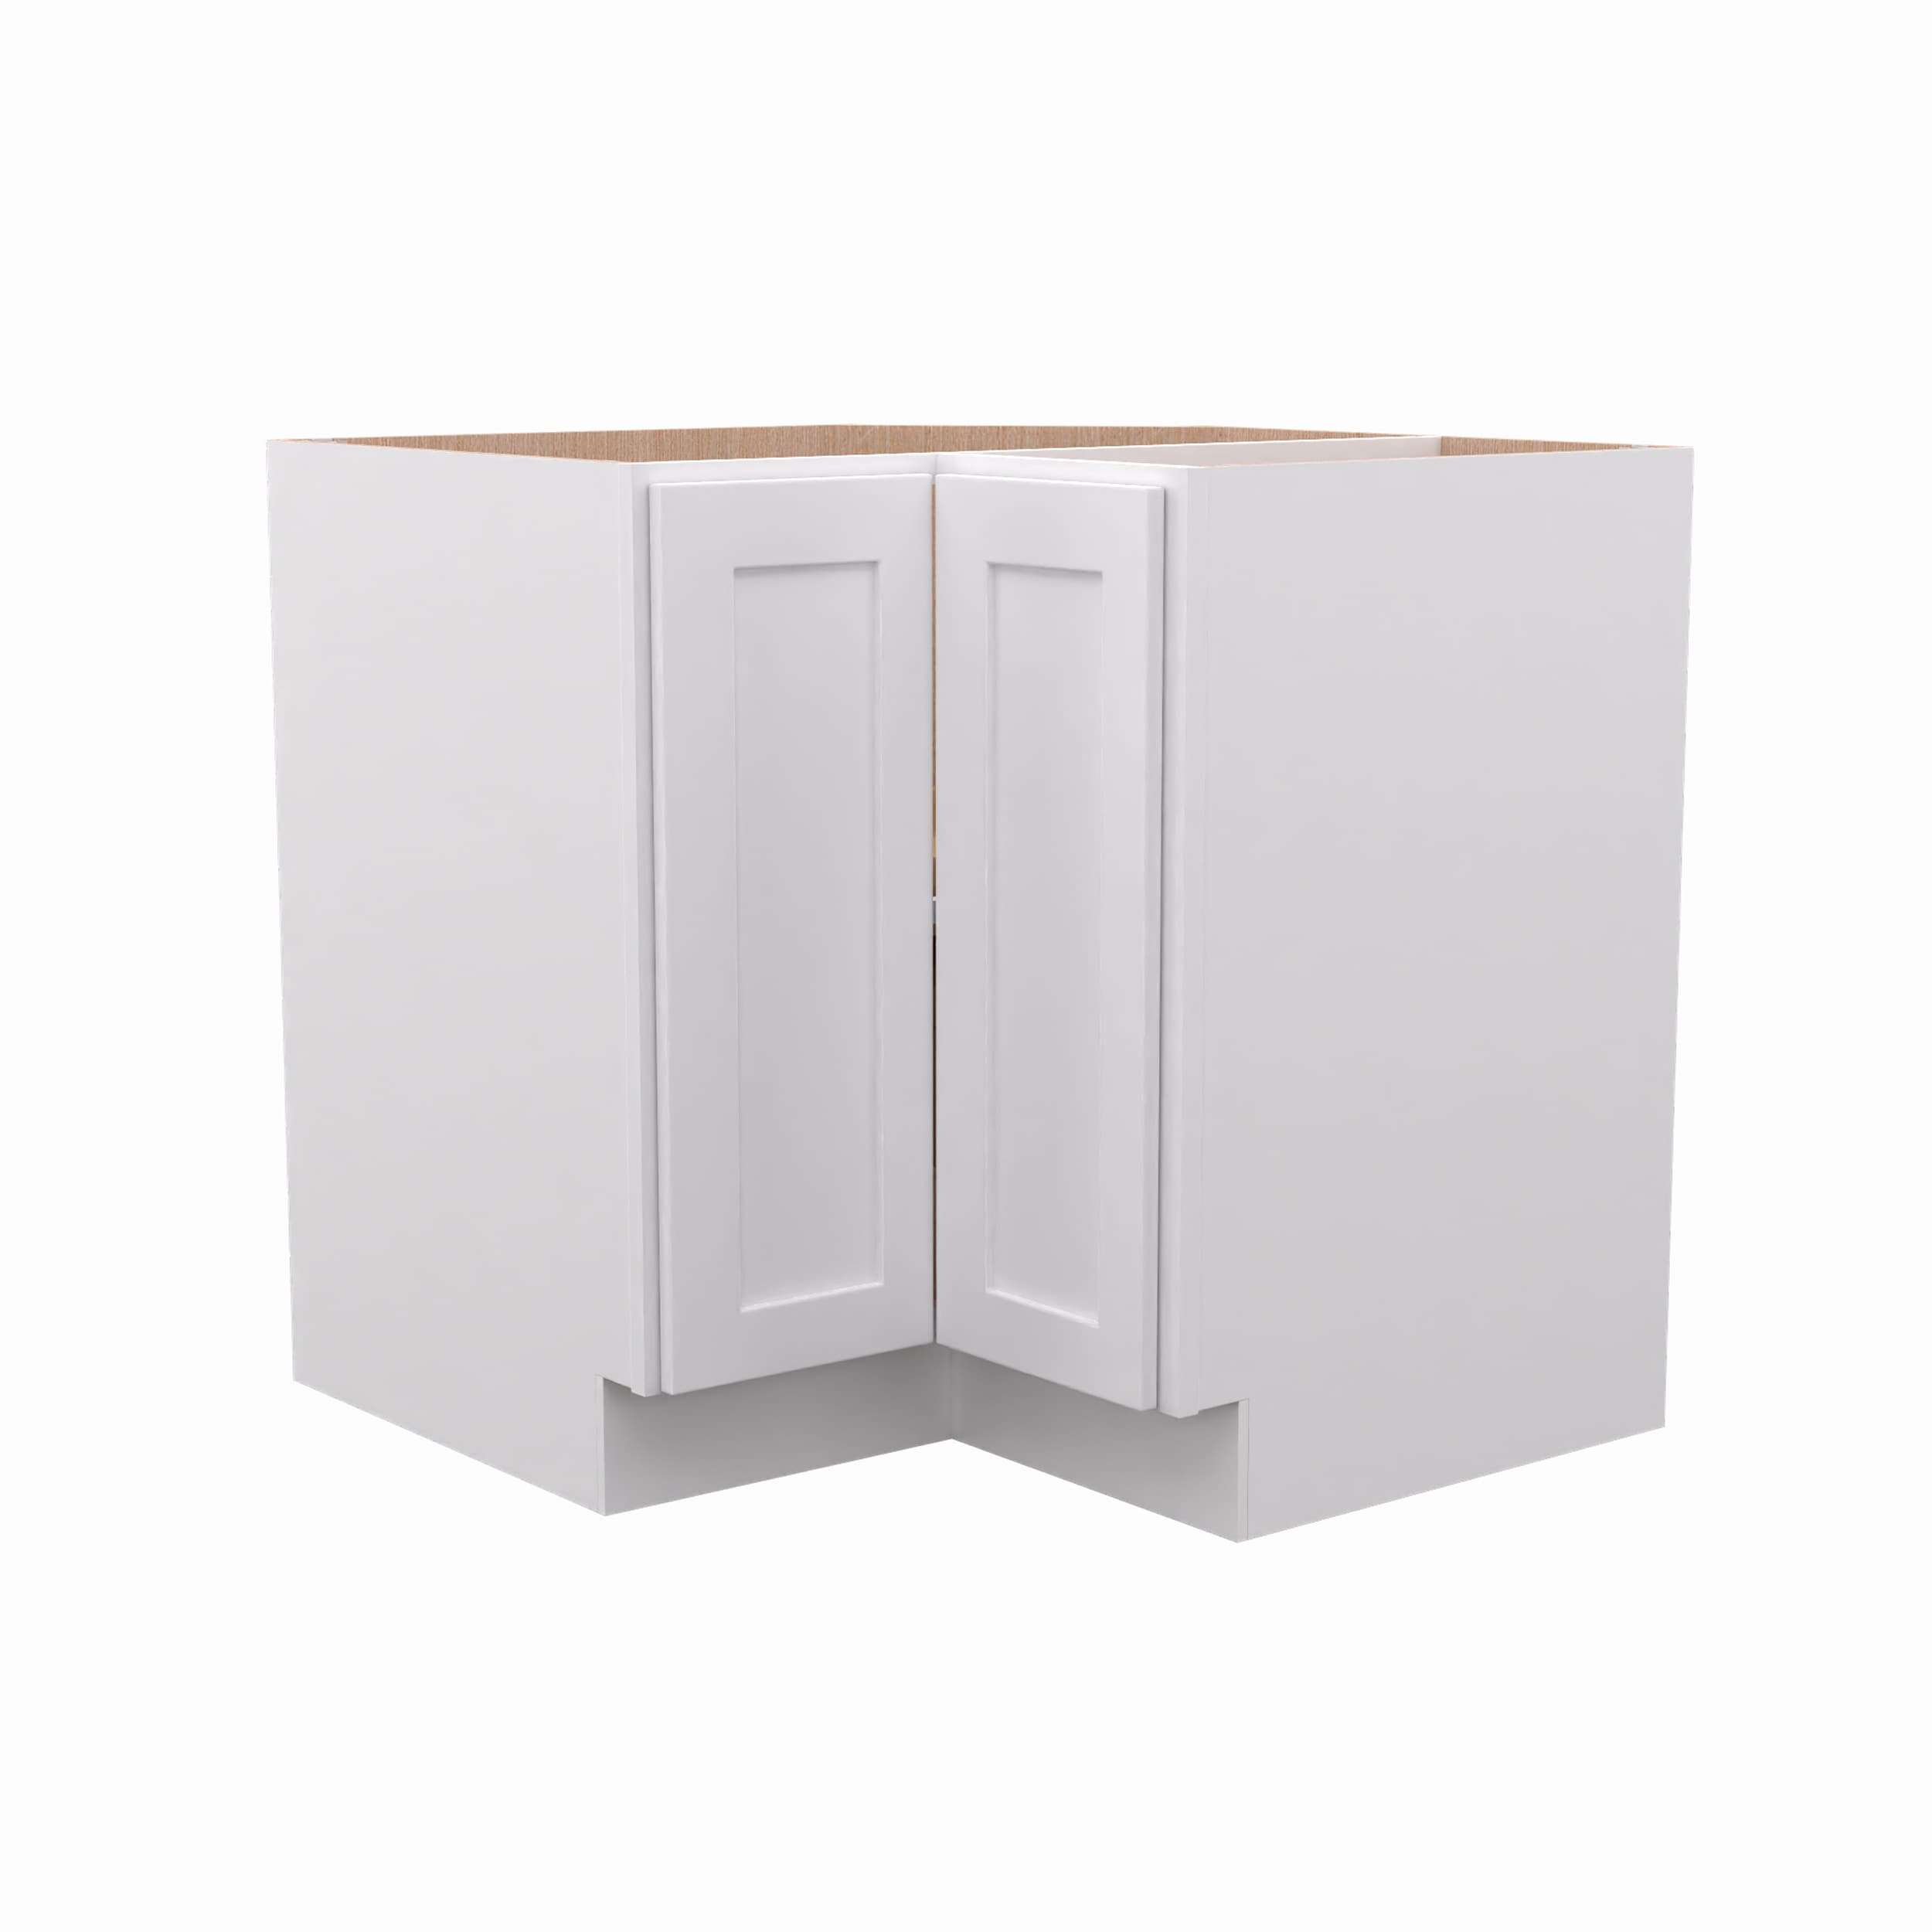 RELIABILT Fairplay 36-in W x 34.5-in H x 24-in D White Lazy Susan ...